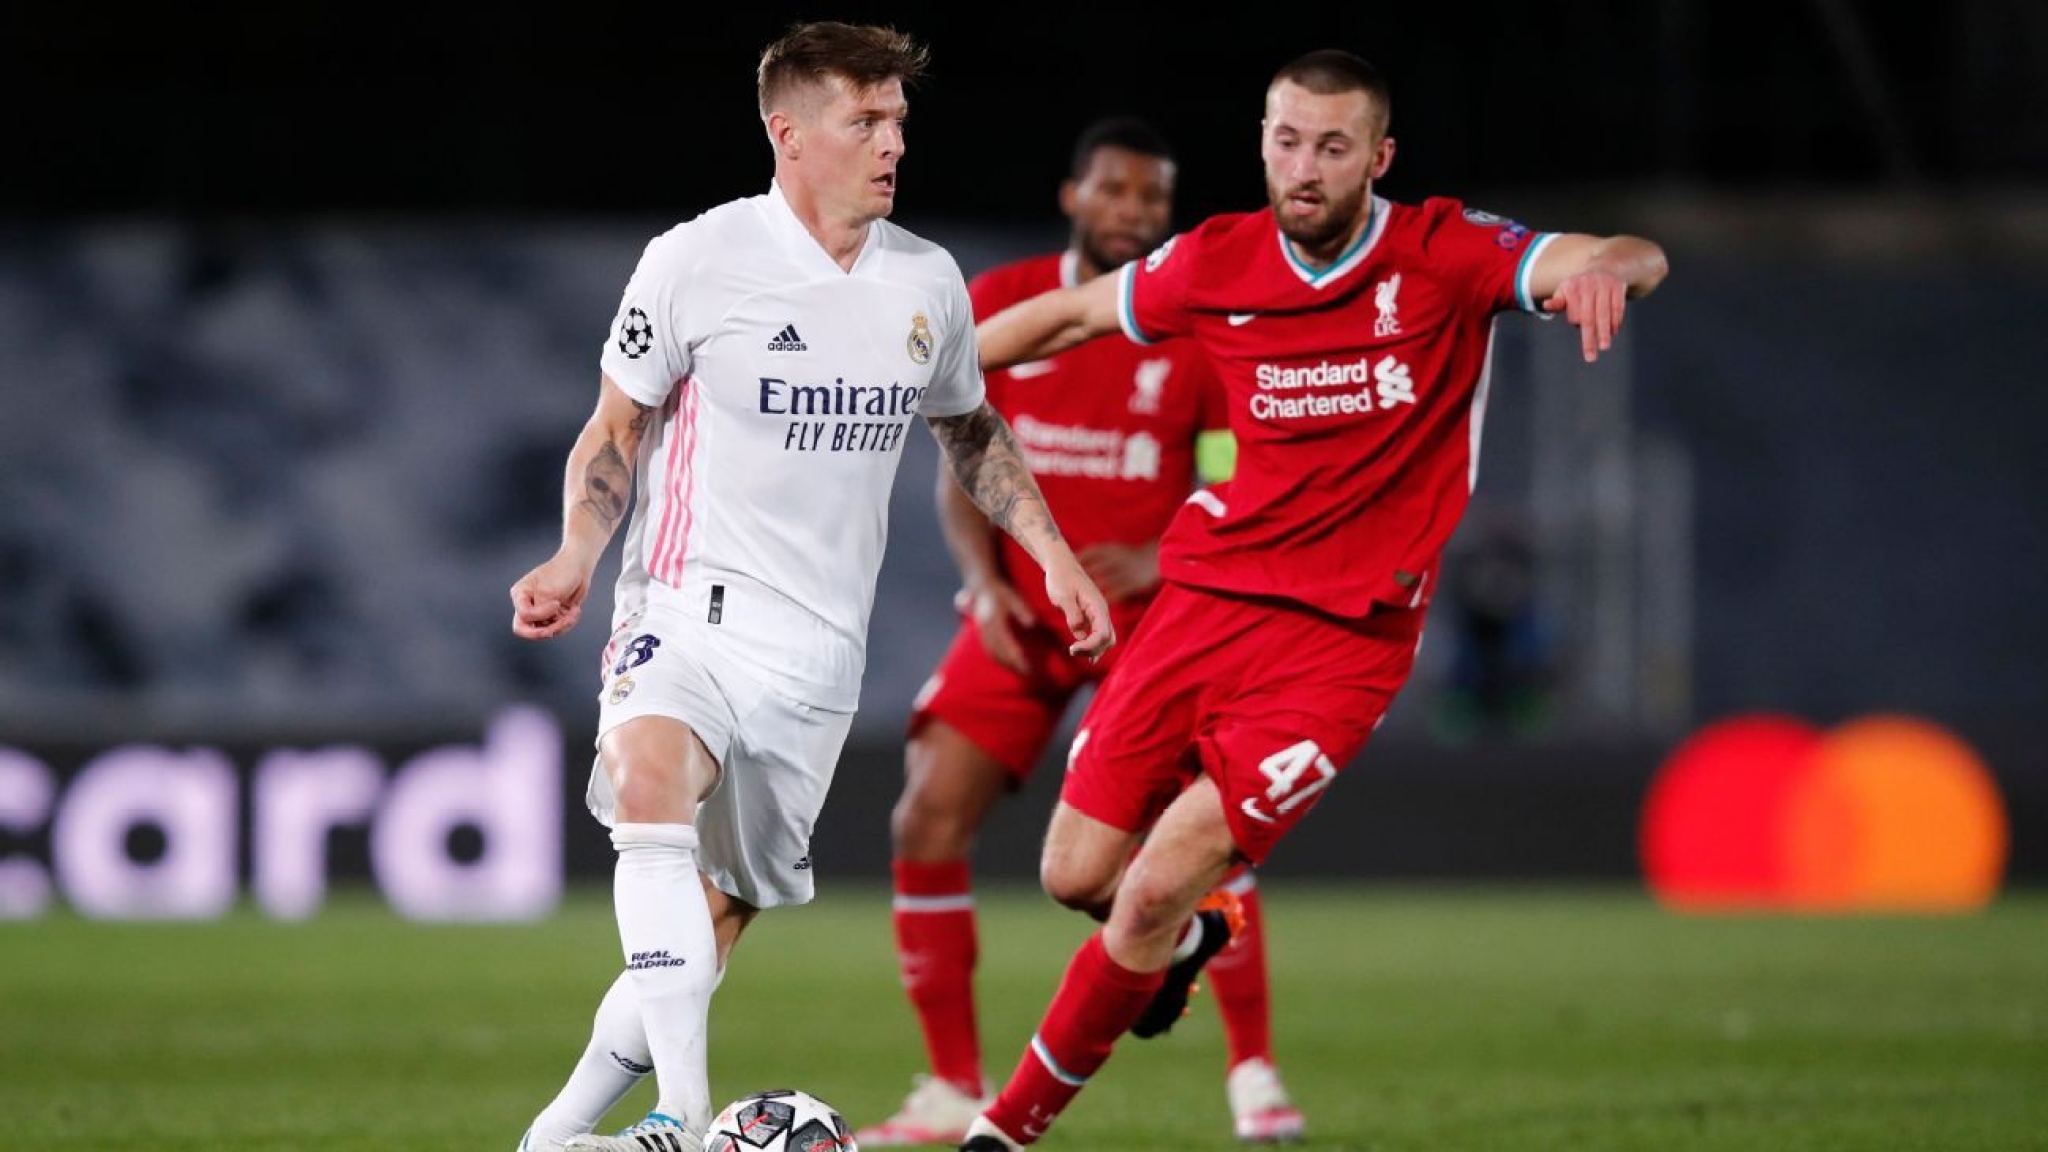 Kroos the key difference-maker as Real Madrid thwarts lackluster Liverpool